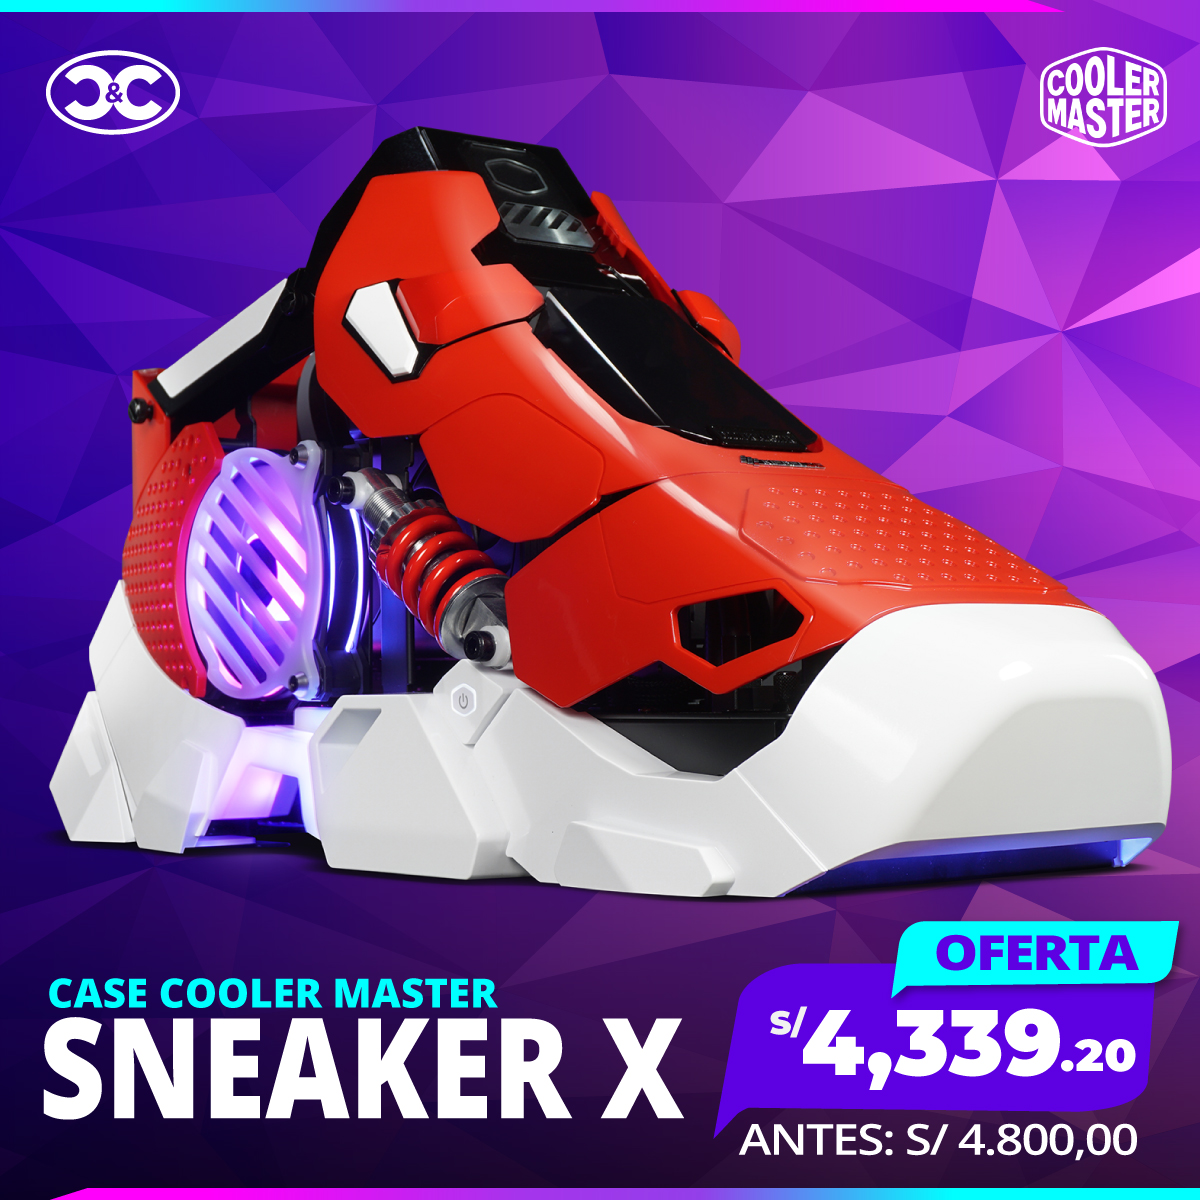 CASE COOLER MASTER SNEAKER X RED ADVANCED SYSTEMS INCLUYE FUENTE SFX 850W GOLD + REFRIGERACION FLUX 360 + 1 COOLER MF120 HALO